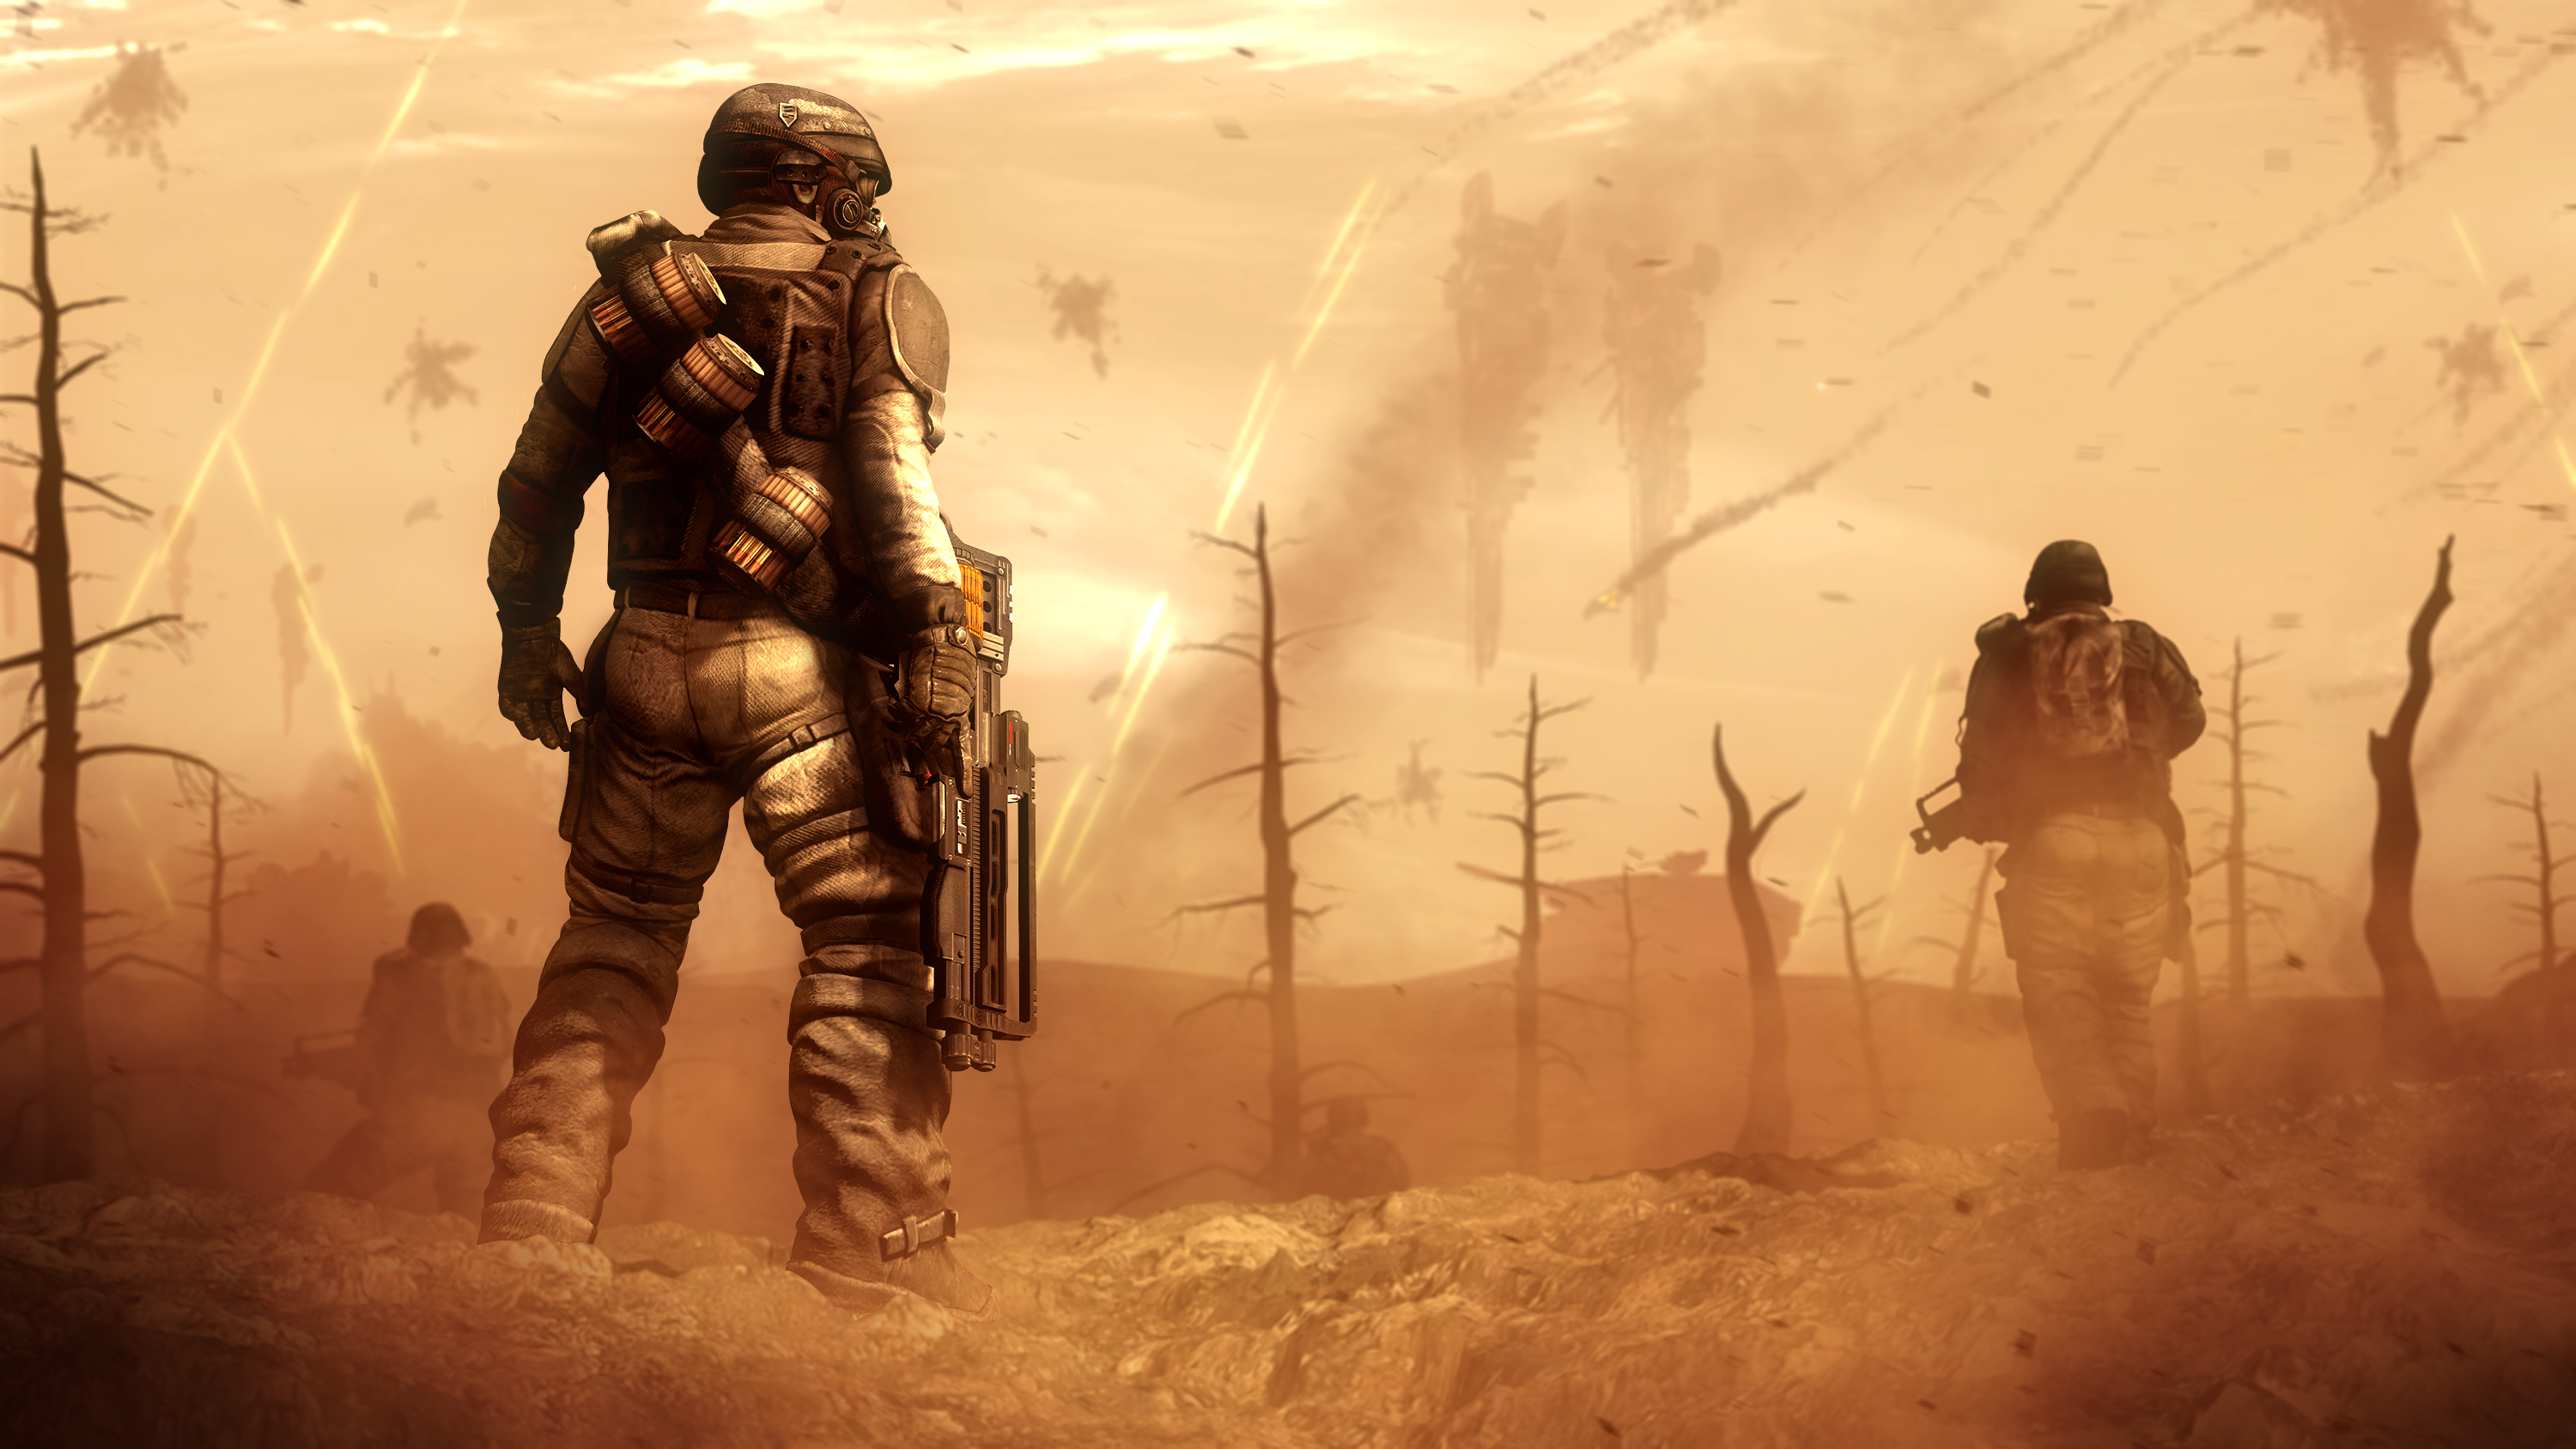 Wasteland Soldier Post Apocalyptic 3000x1688